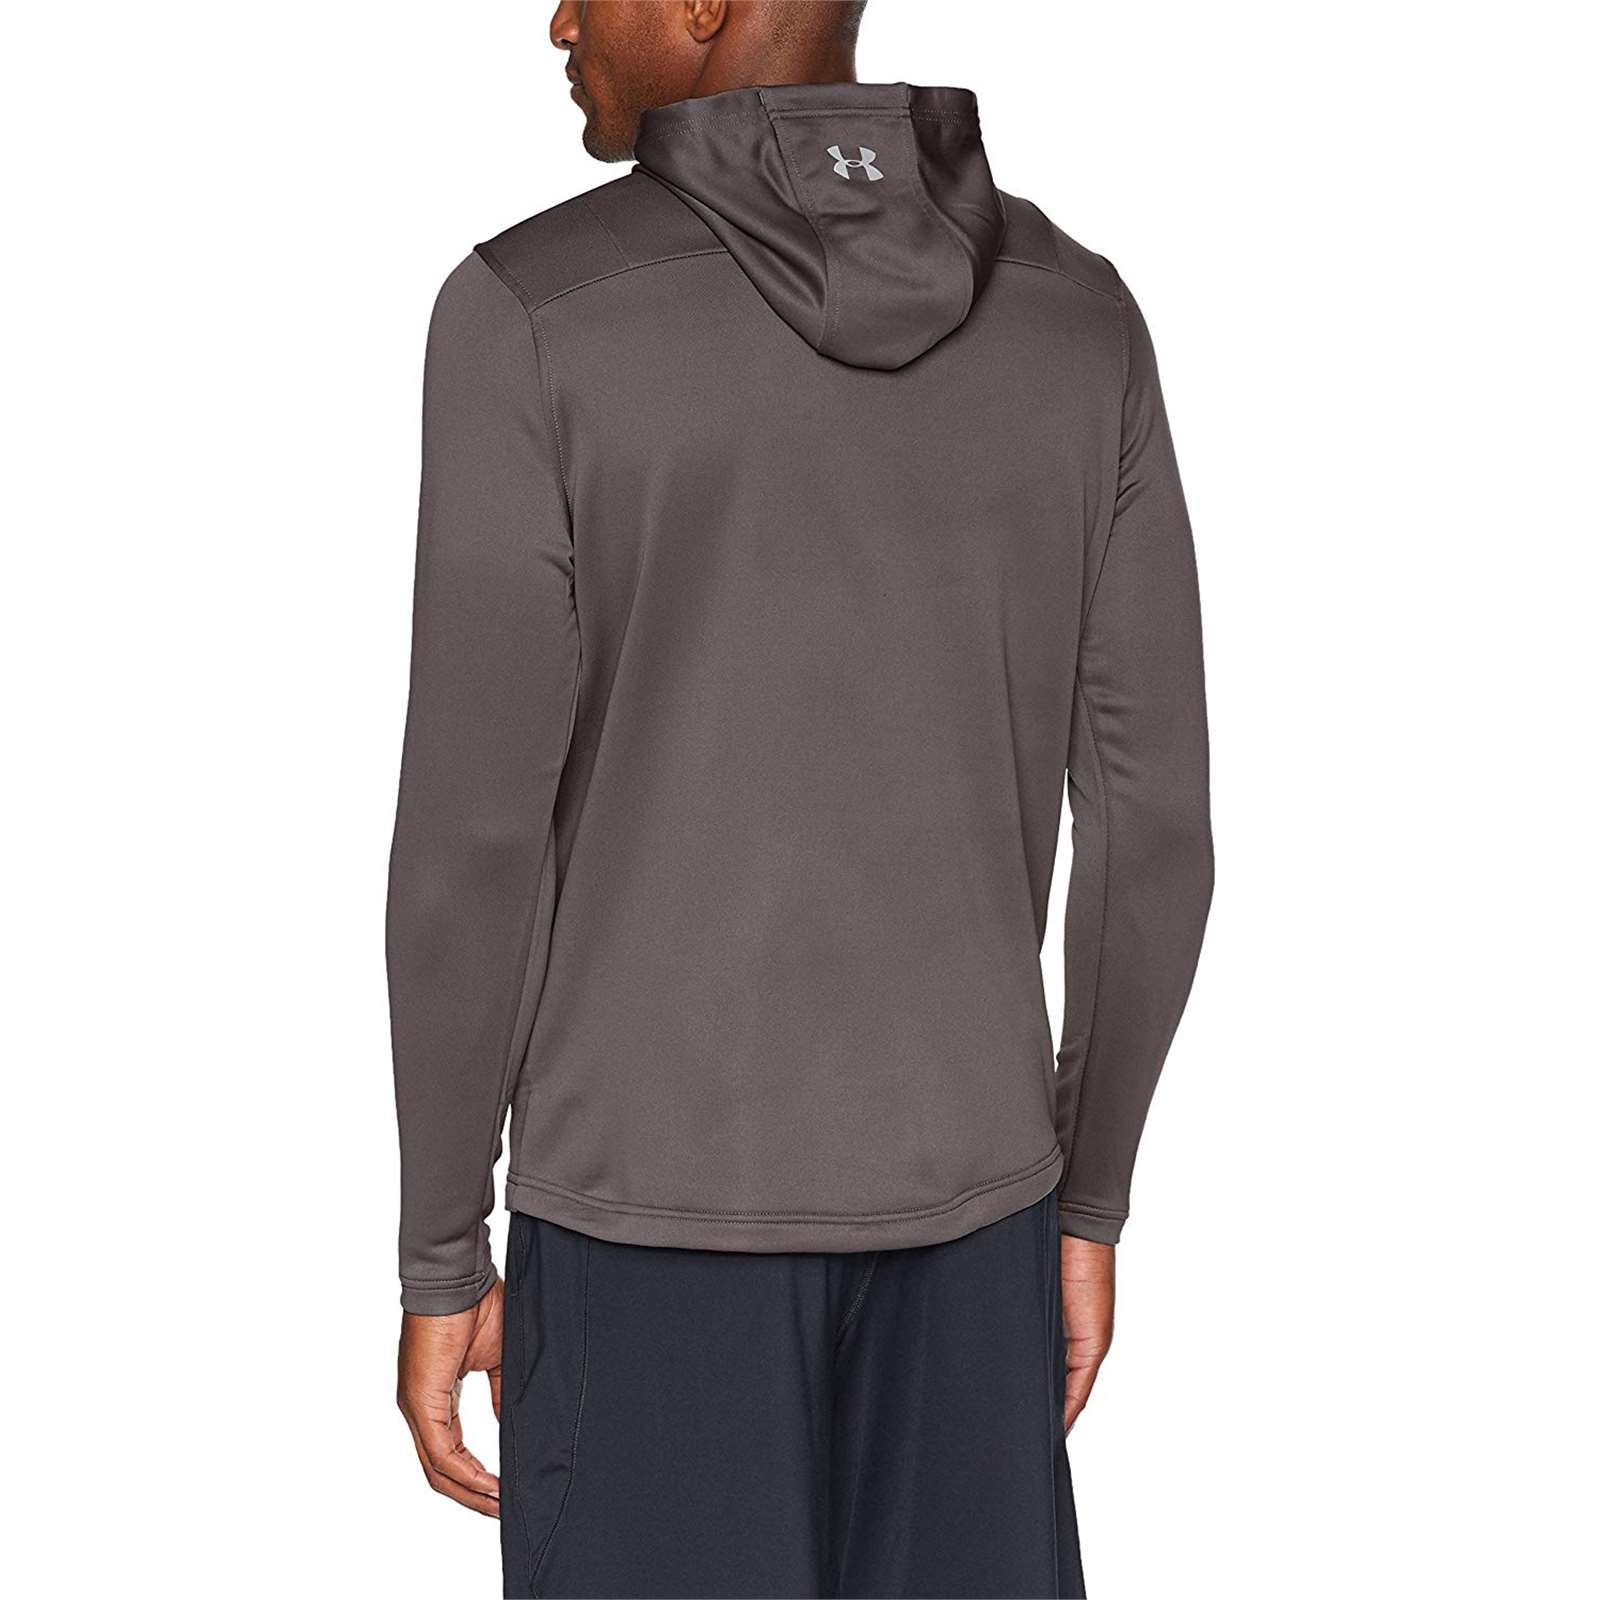 Under Armour Men Tech Terry Mtn Graphic Hoodie